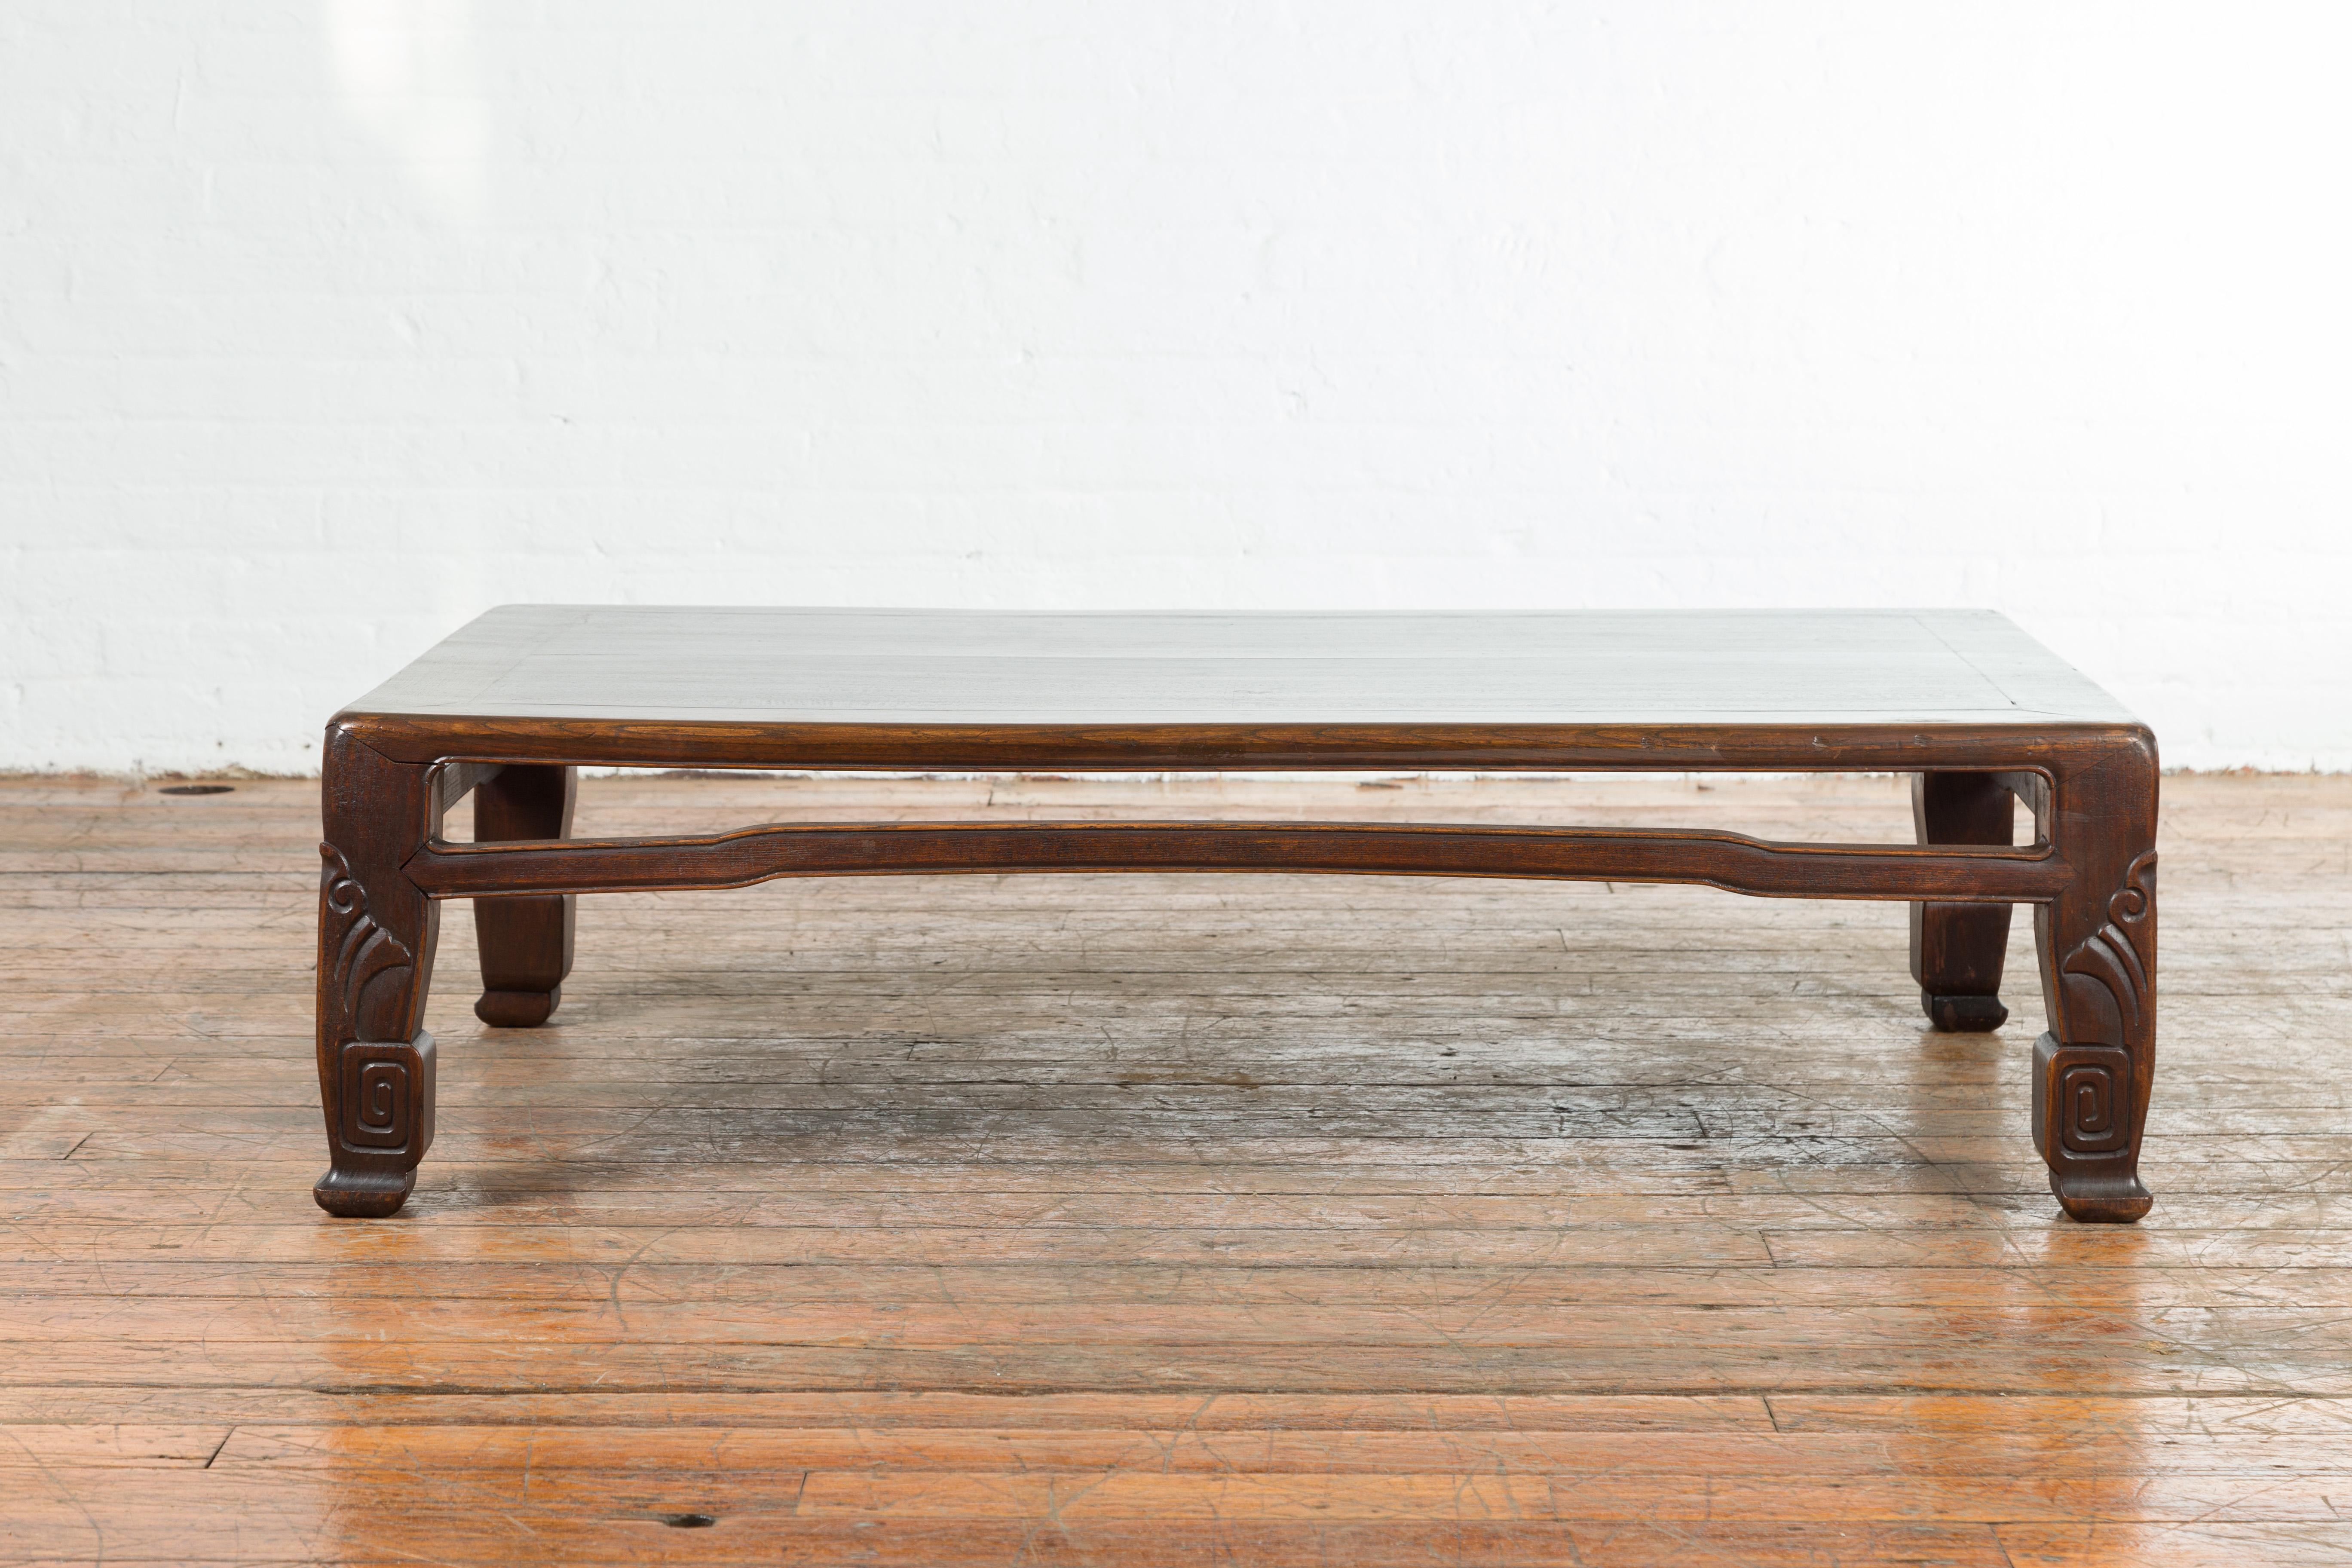 A Chinese antique elmwood coffee table from the early 20th century, with scrolling feet and humpback stretcher. Created in China during the early years of the 20th century, this elmwood coffee table features a rectangular planked top sitting above a